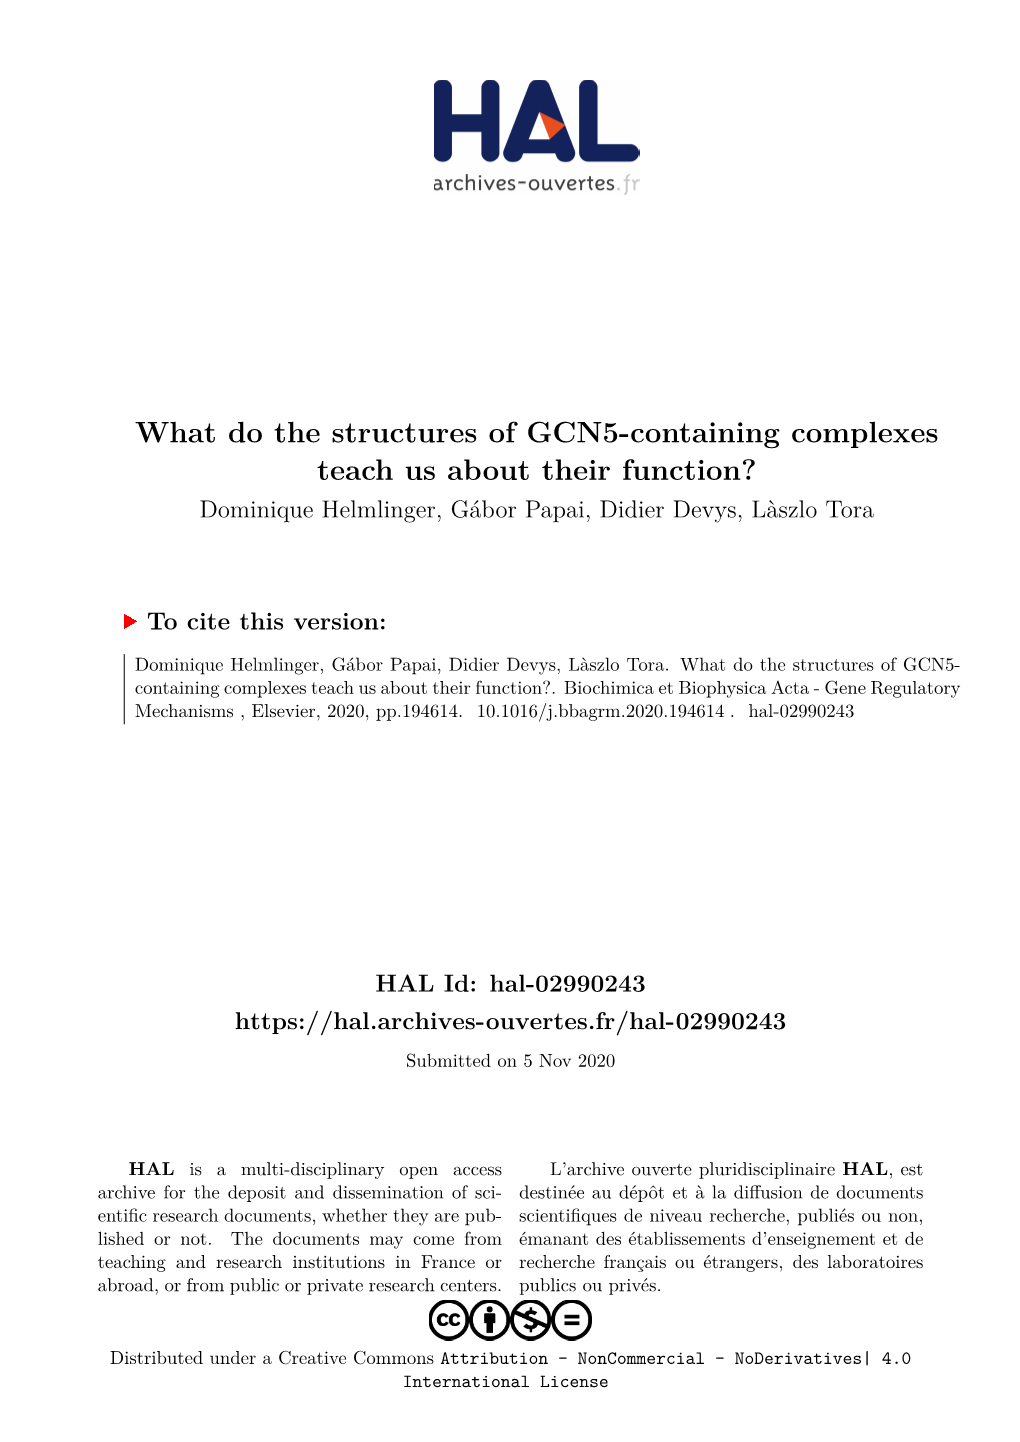 What Do the Structures of GCN5-Containing Complexes Teach Us About Their Function? Dominique Helmlinger, Gábor Papai, Didier Devys, Làszlo Tora